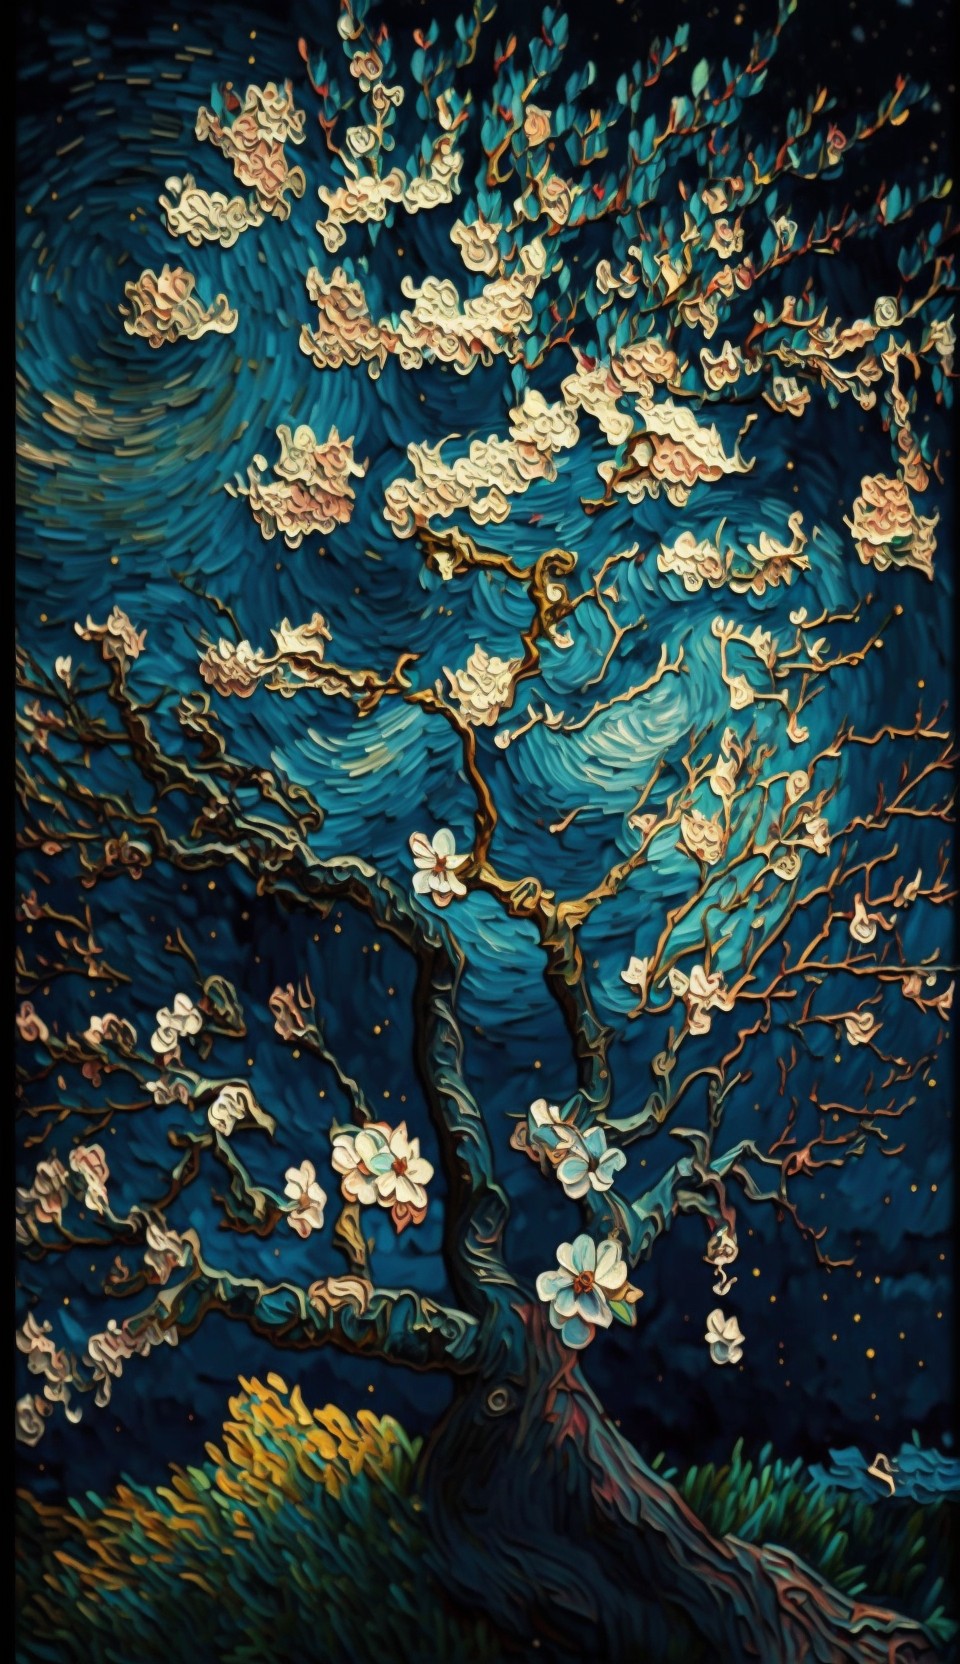 7 images of Put spring into Van Gogh's paintings by Midjourney